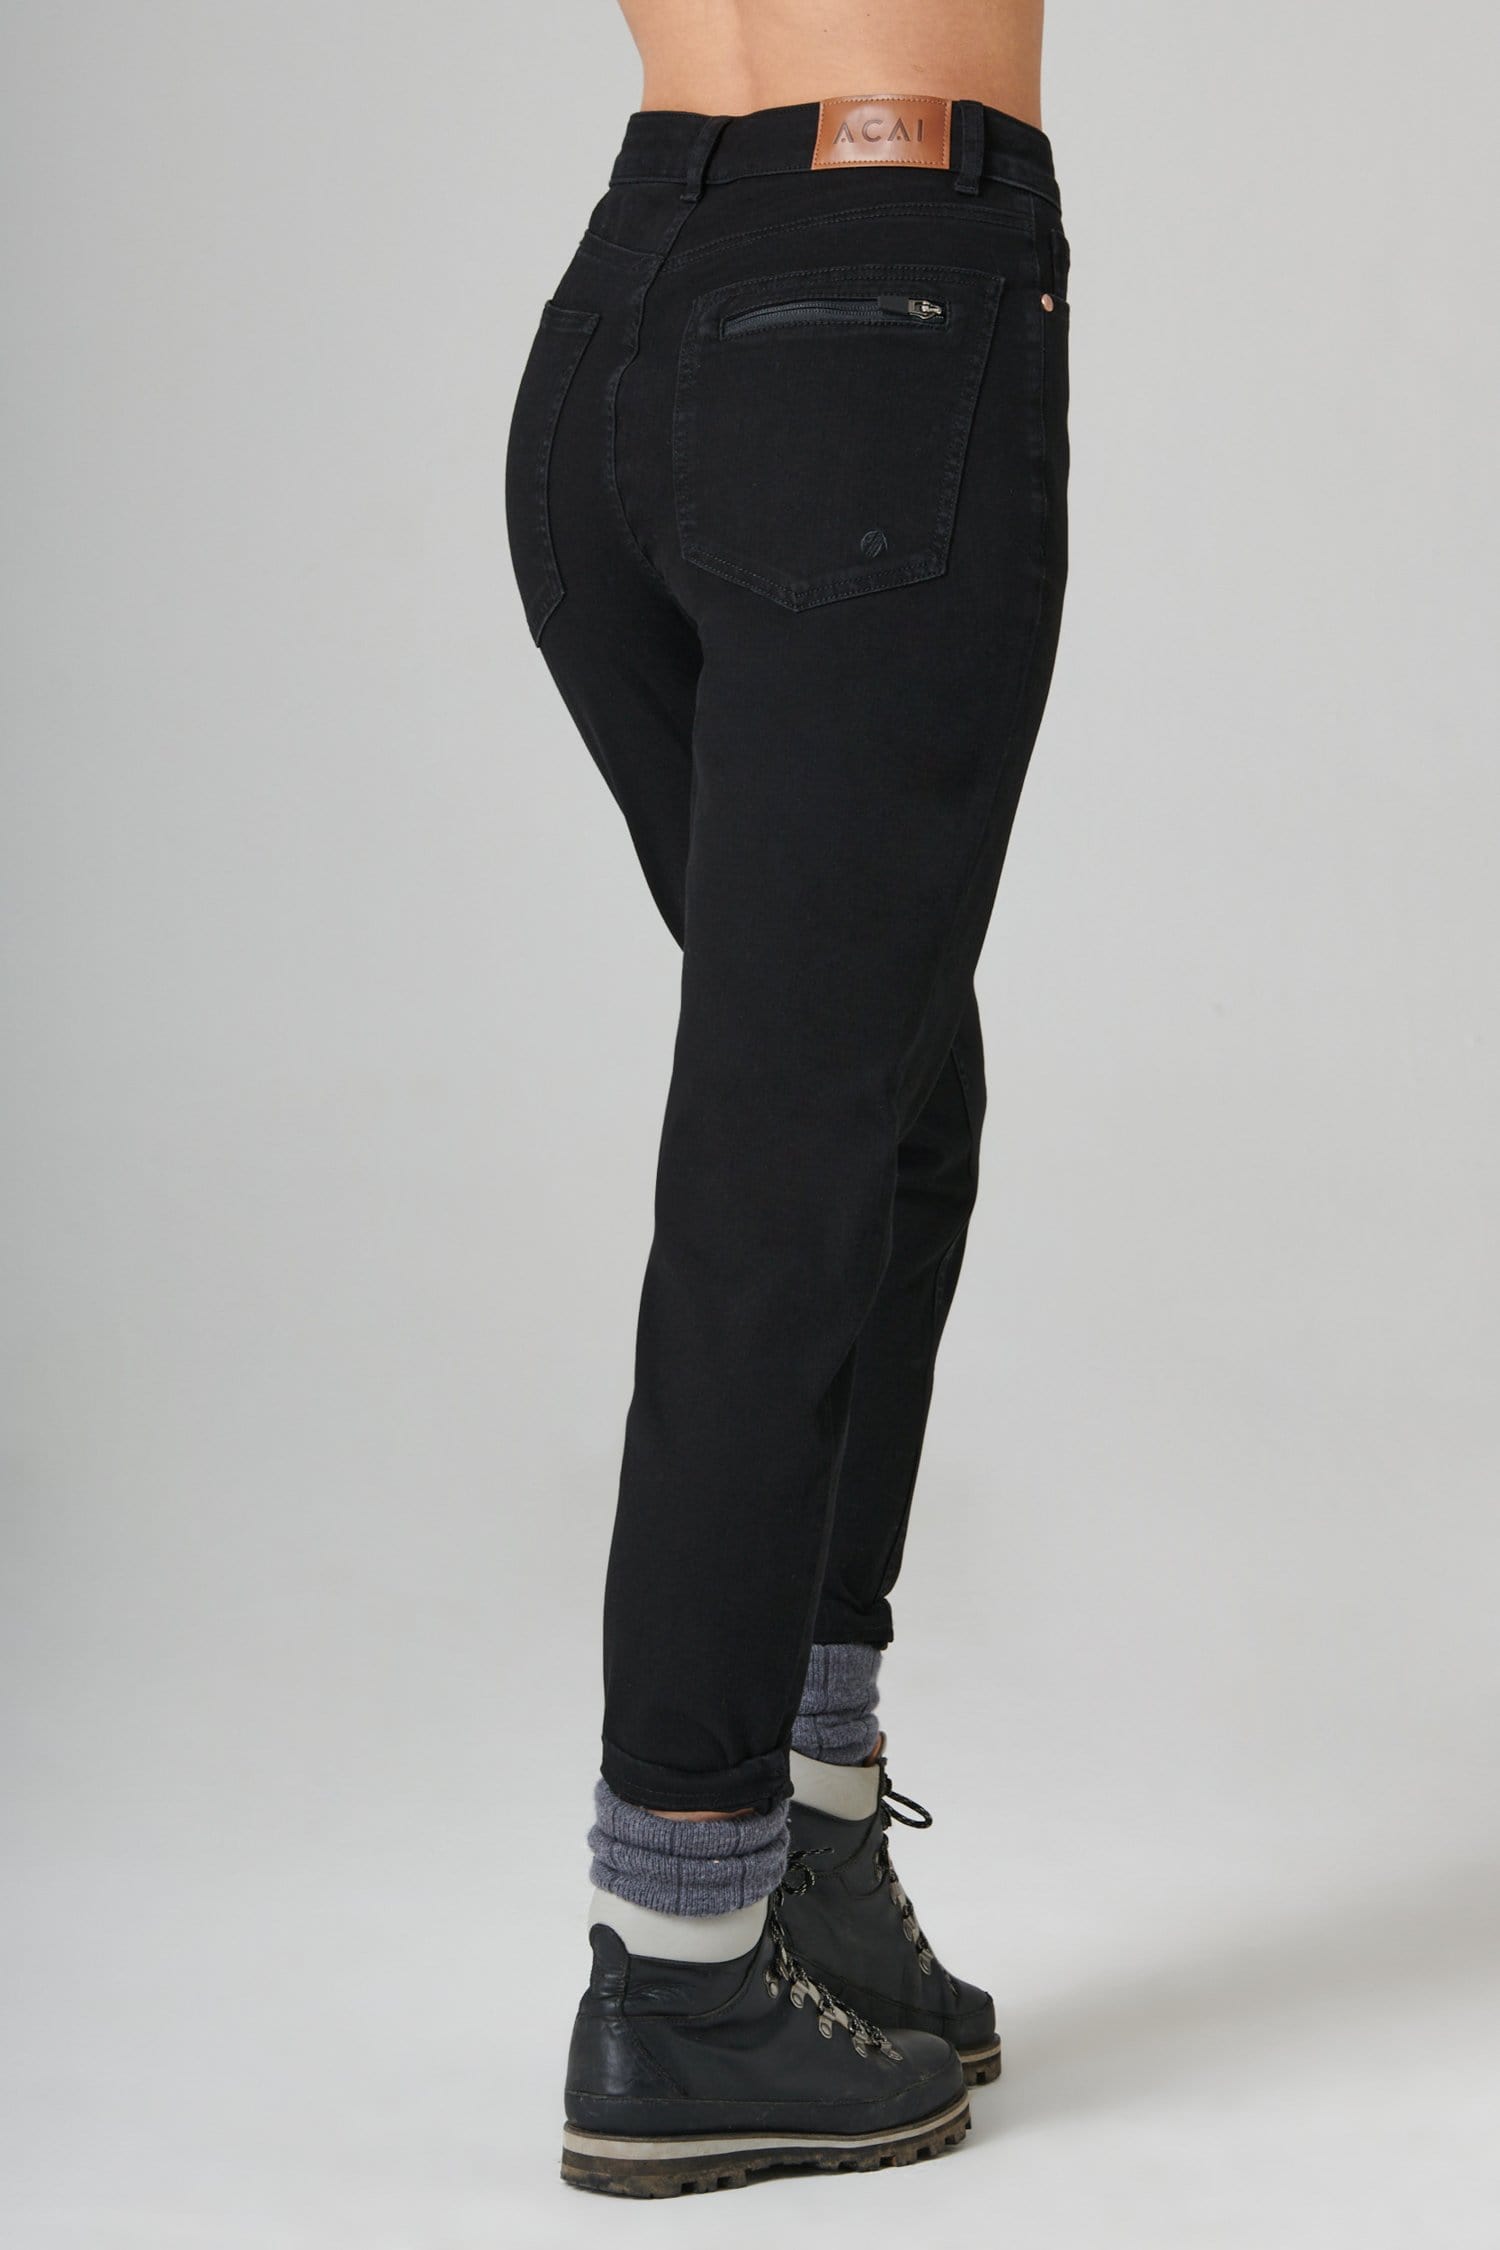 The Outdoor Slim Fit Jeans - Black Denim Trousers  